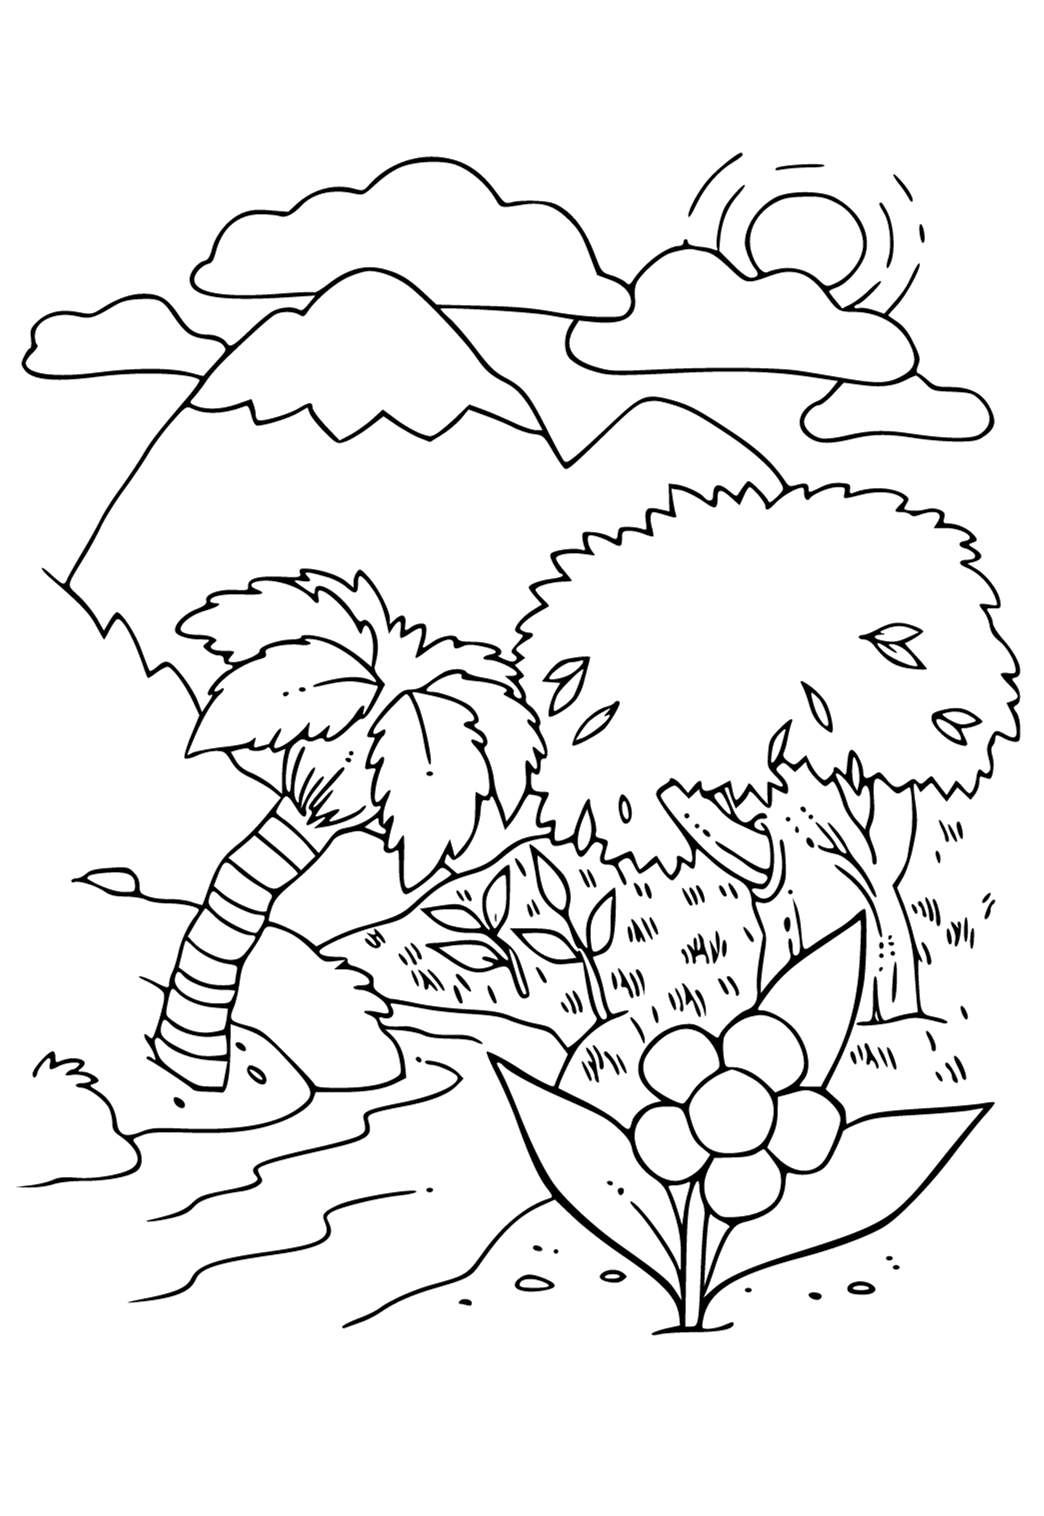 Free printable creation nature coloring page for adults and kids